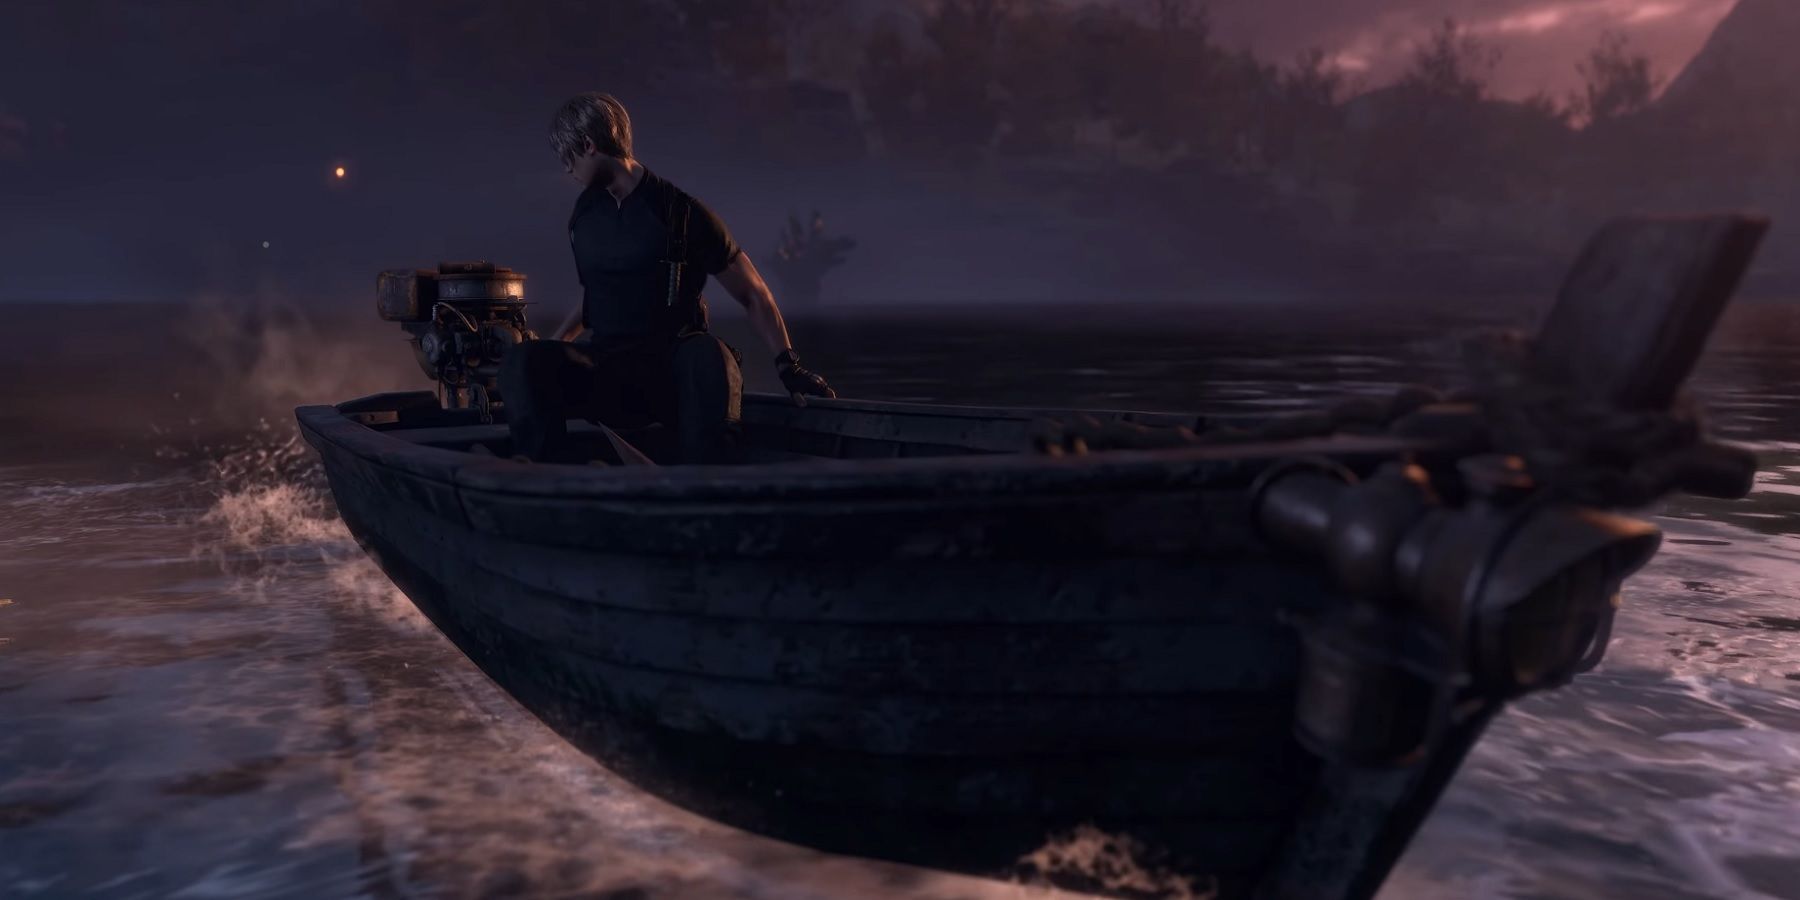 Image from the Resident Evil 4 remake showing Leon Kennedy on a boat in the middle of a lake.